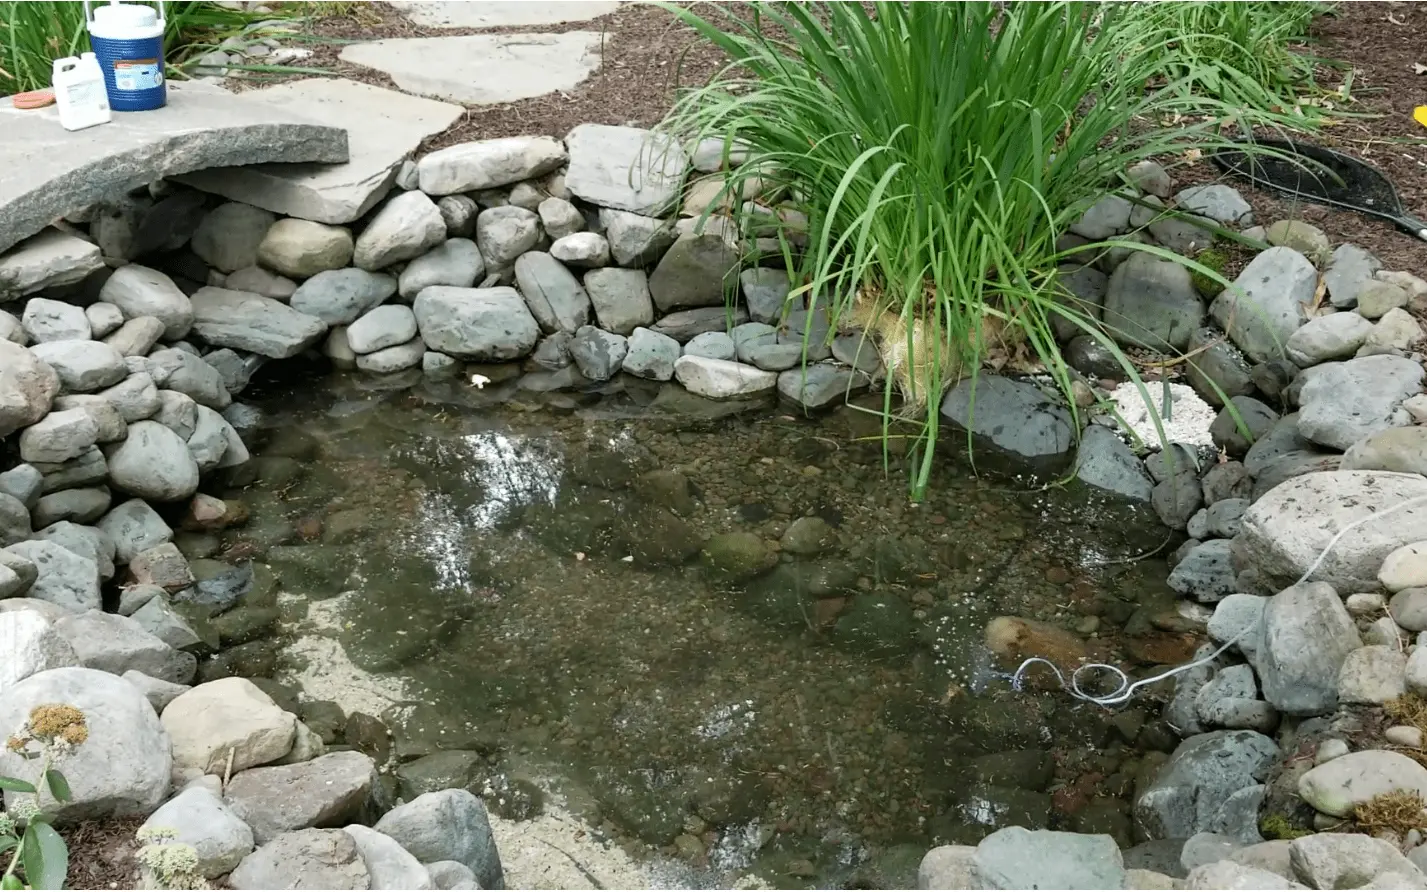 After a cleaning the tinted pond water is replace with clear tap water.